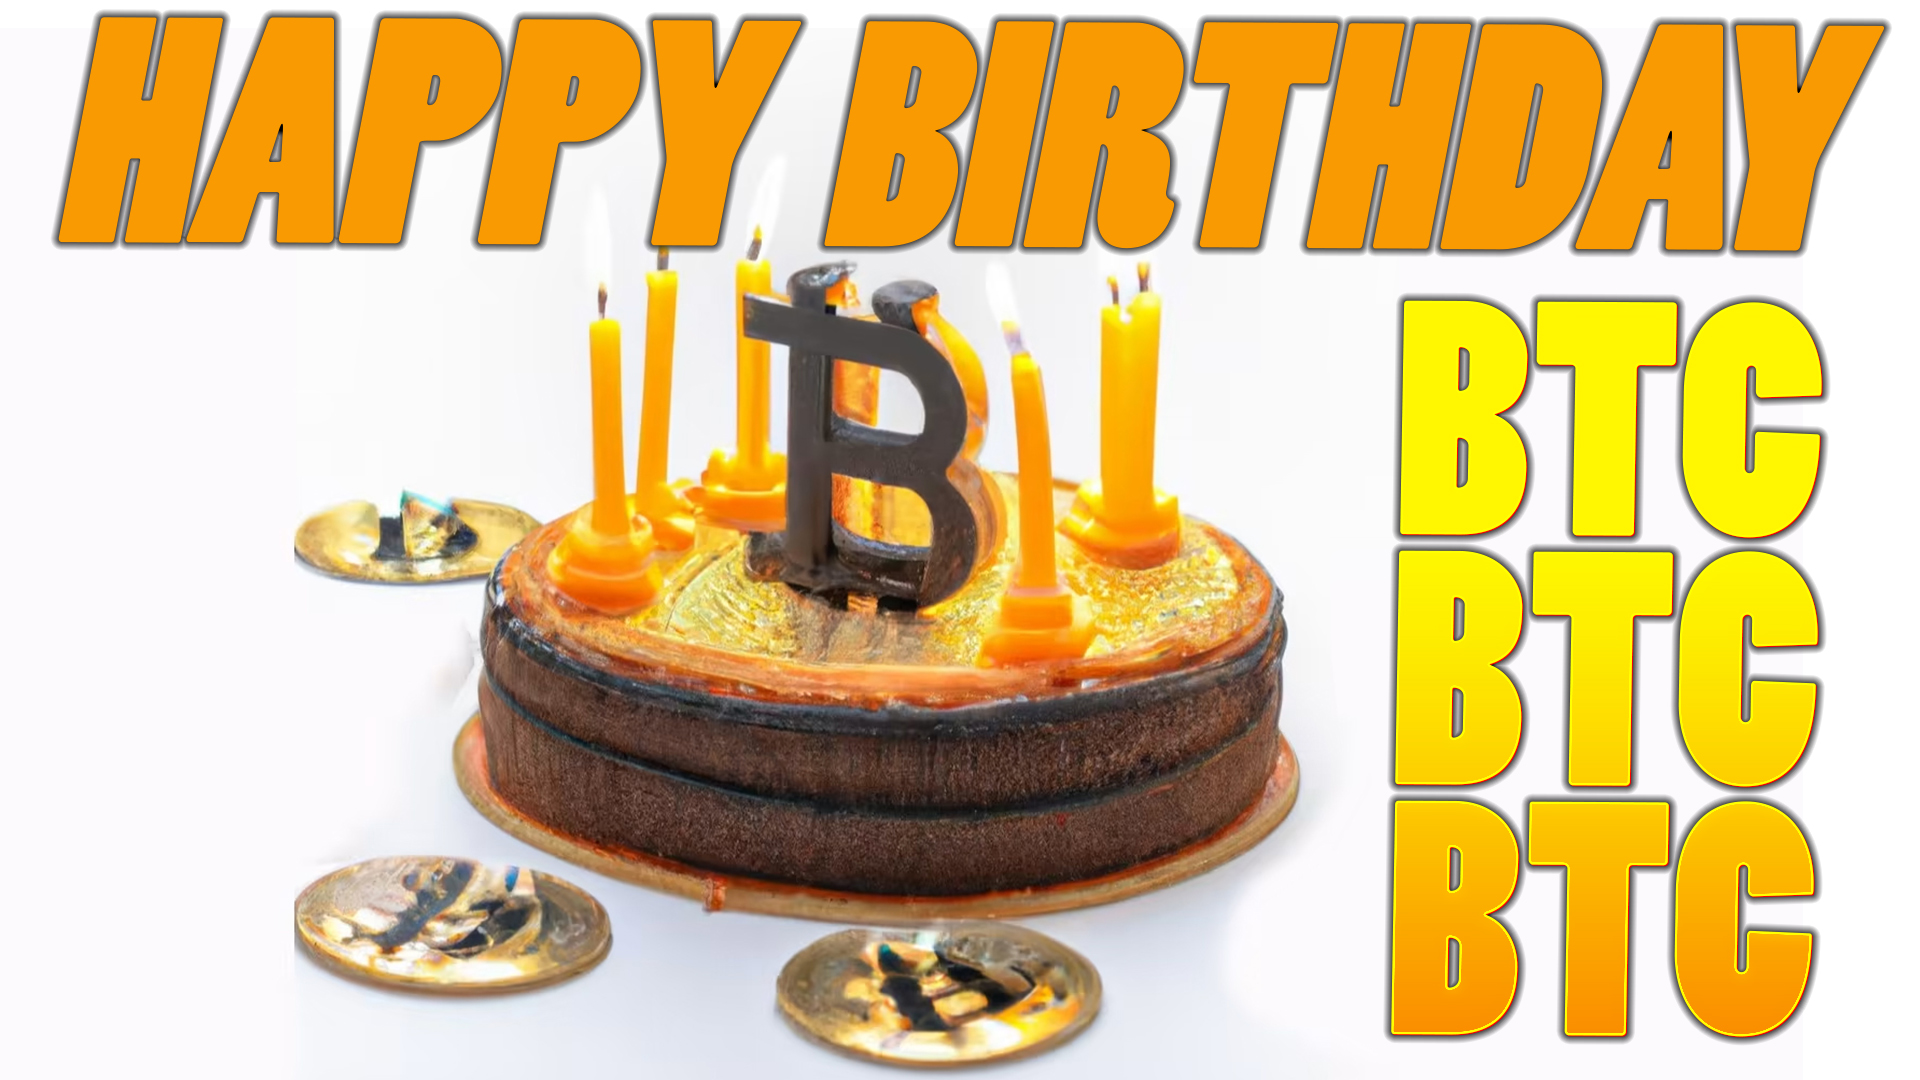 10 facts about bitcoin you probably didn't know